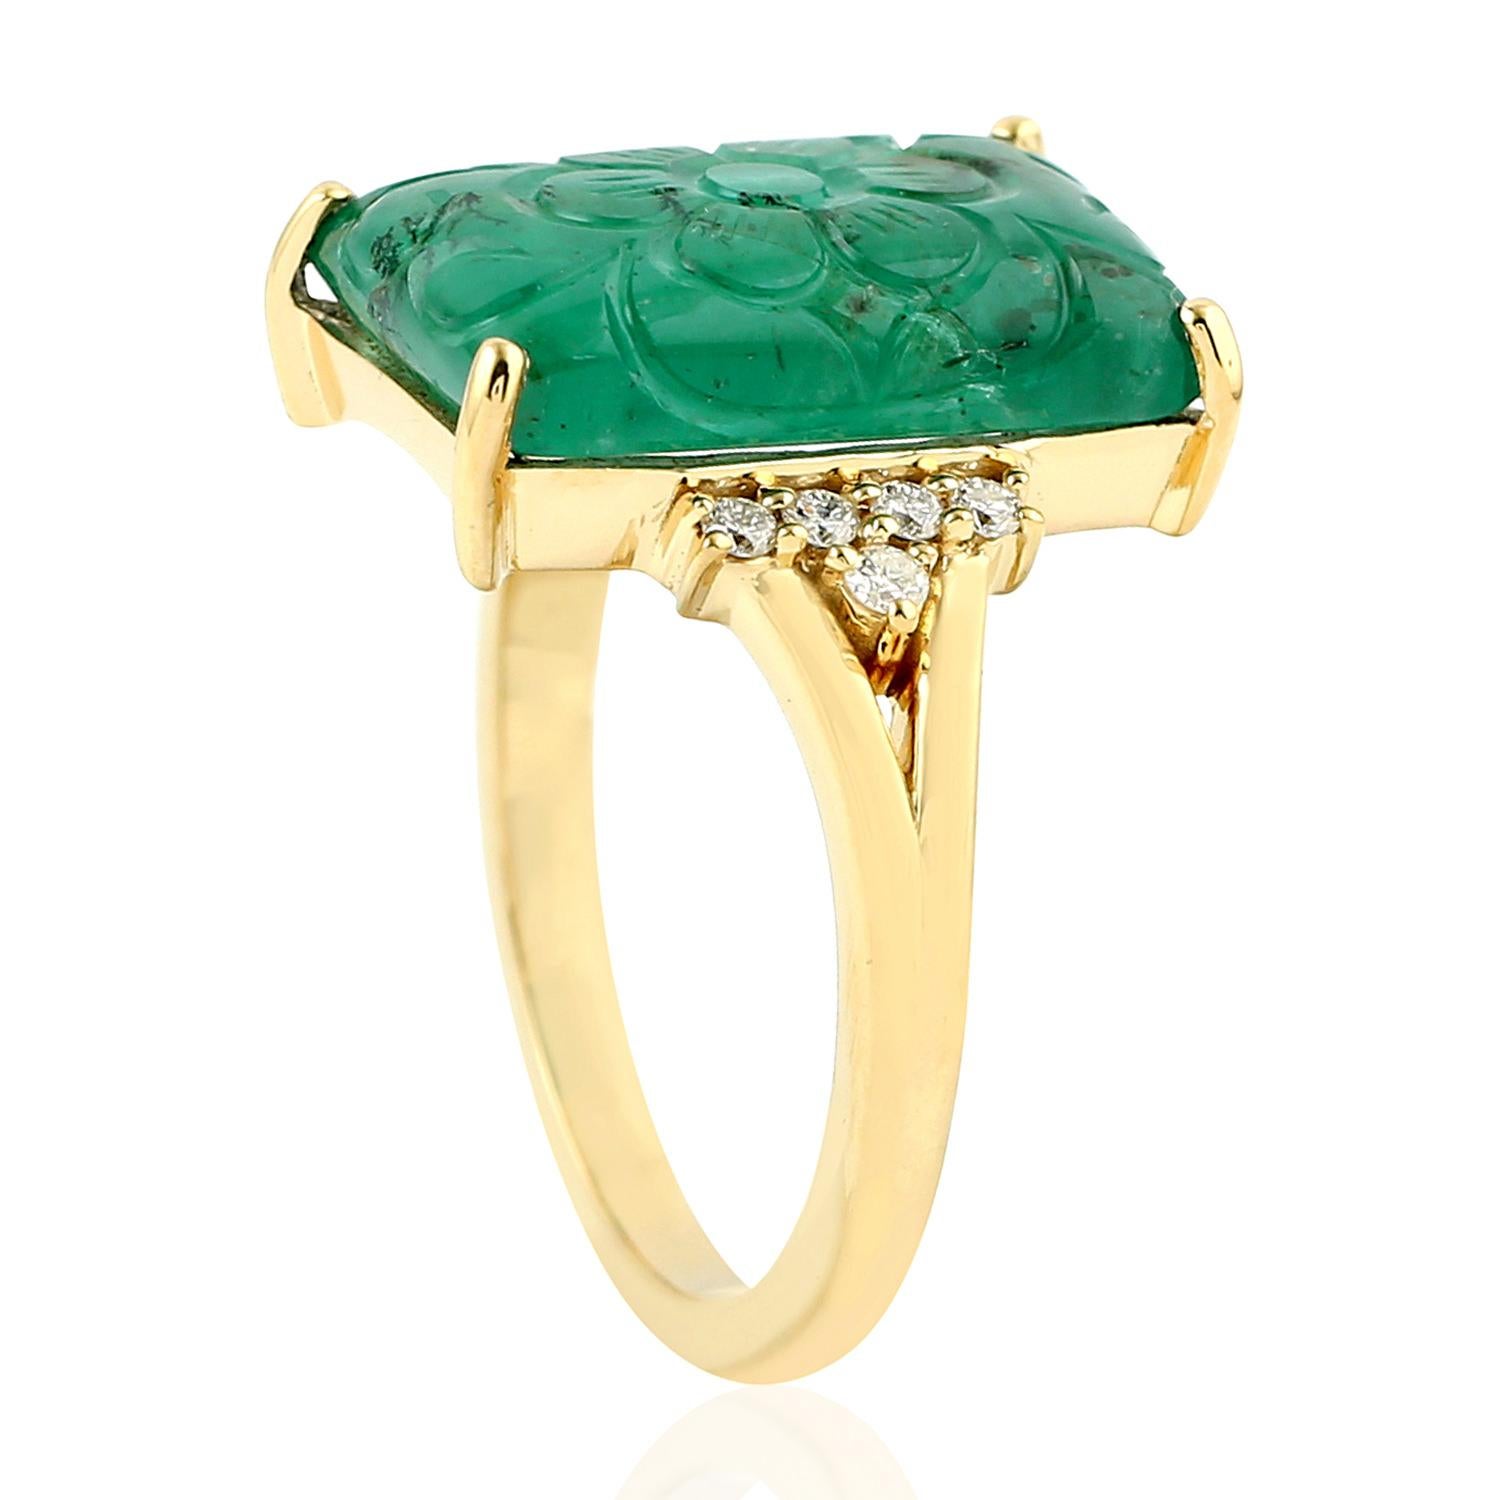 Carved Emerald Cocktail Ring with Pave Diamonds Made in 18k Gold In New Condition For Sale In New York, NY